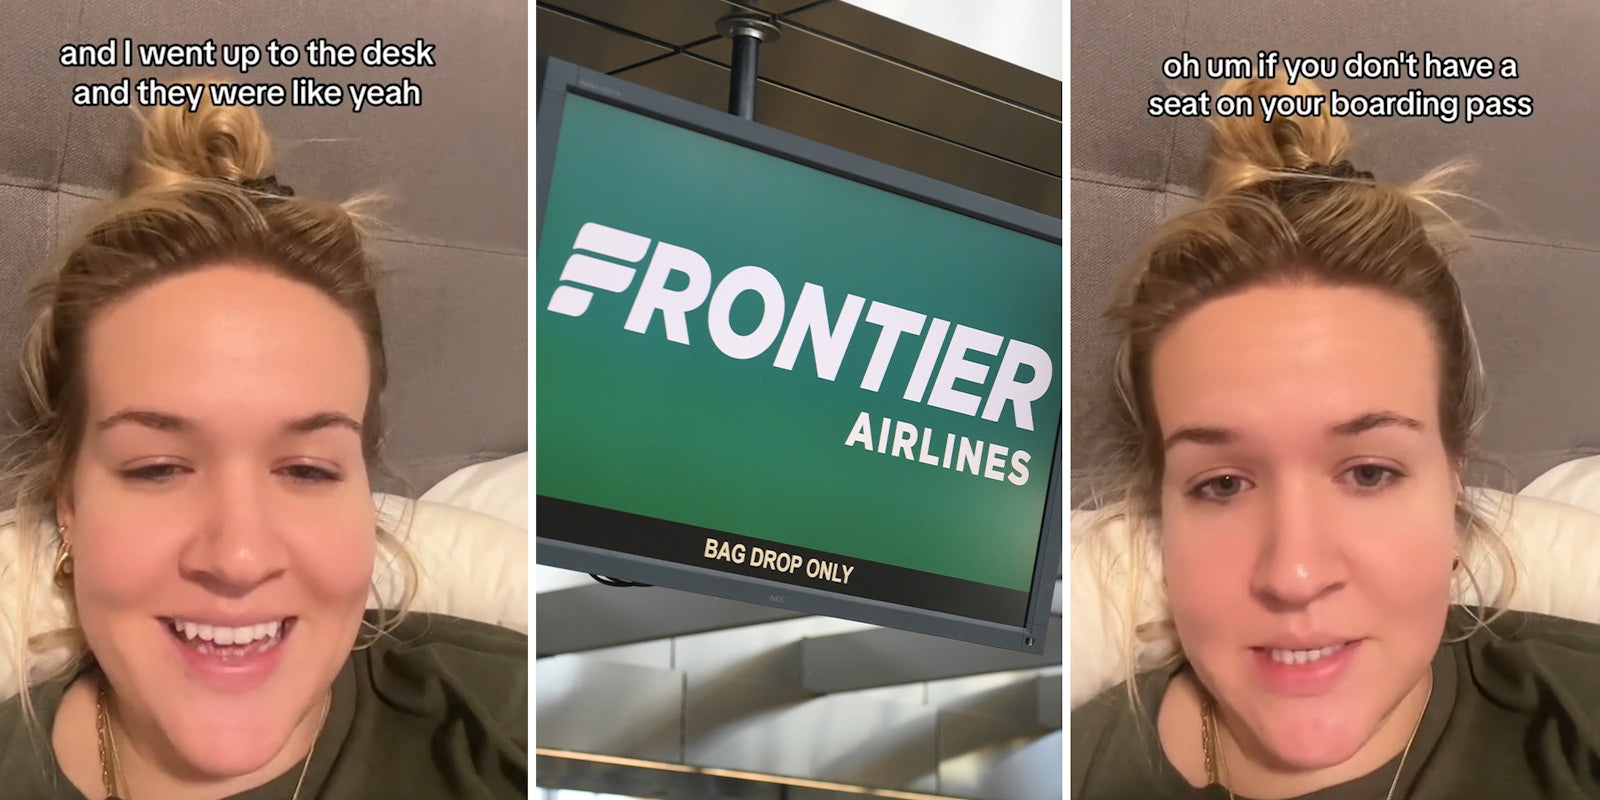 Frontier Airlines customer books a flight but forgets to select a seat online. She can't believe what the front desk tells her